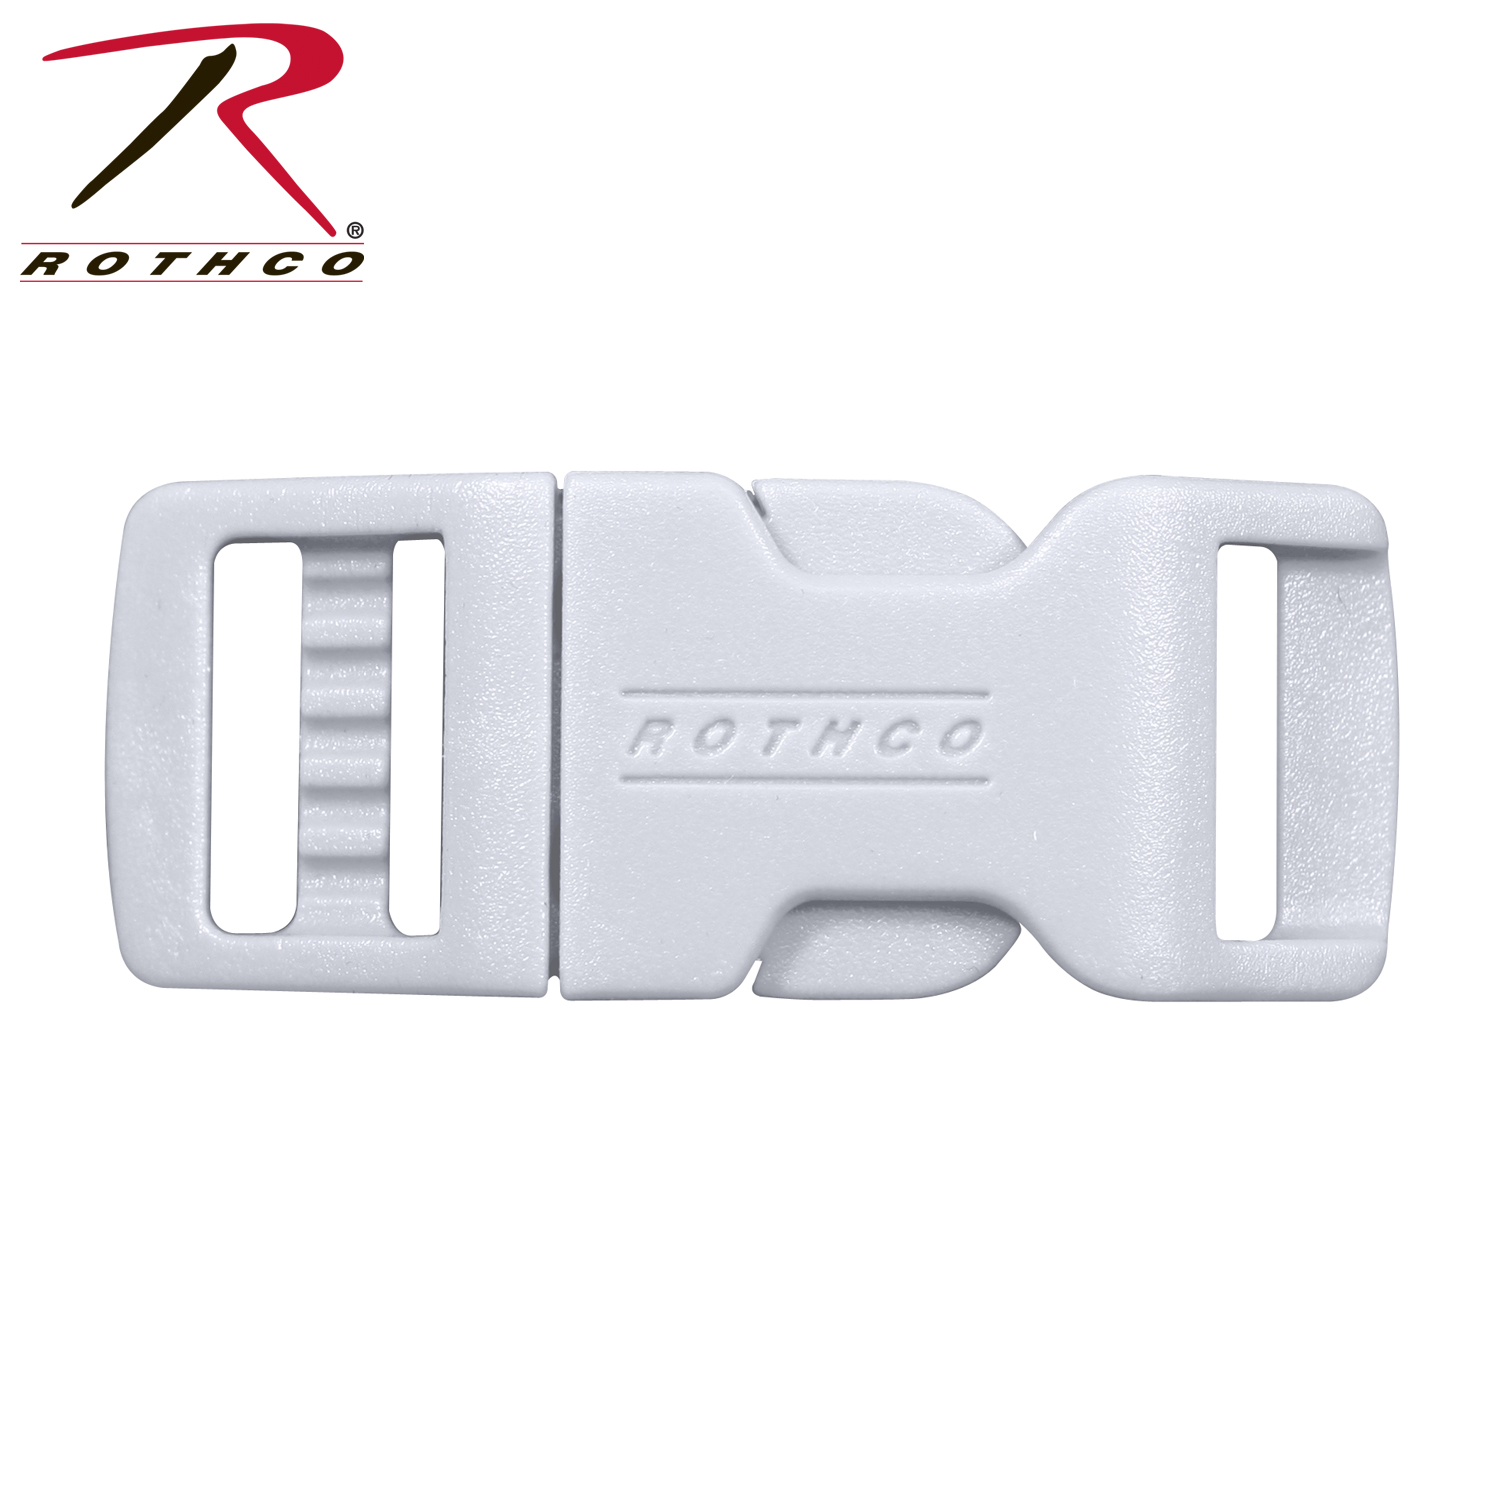 Rothco 1/2" Side Release Buckle